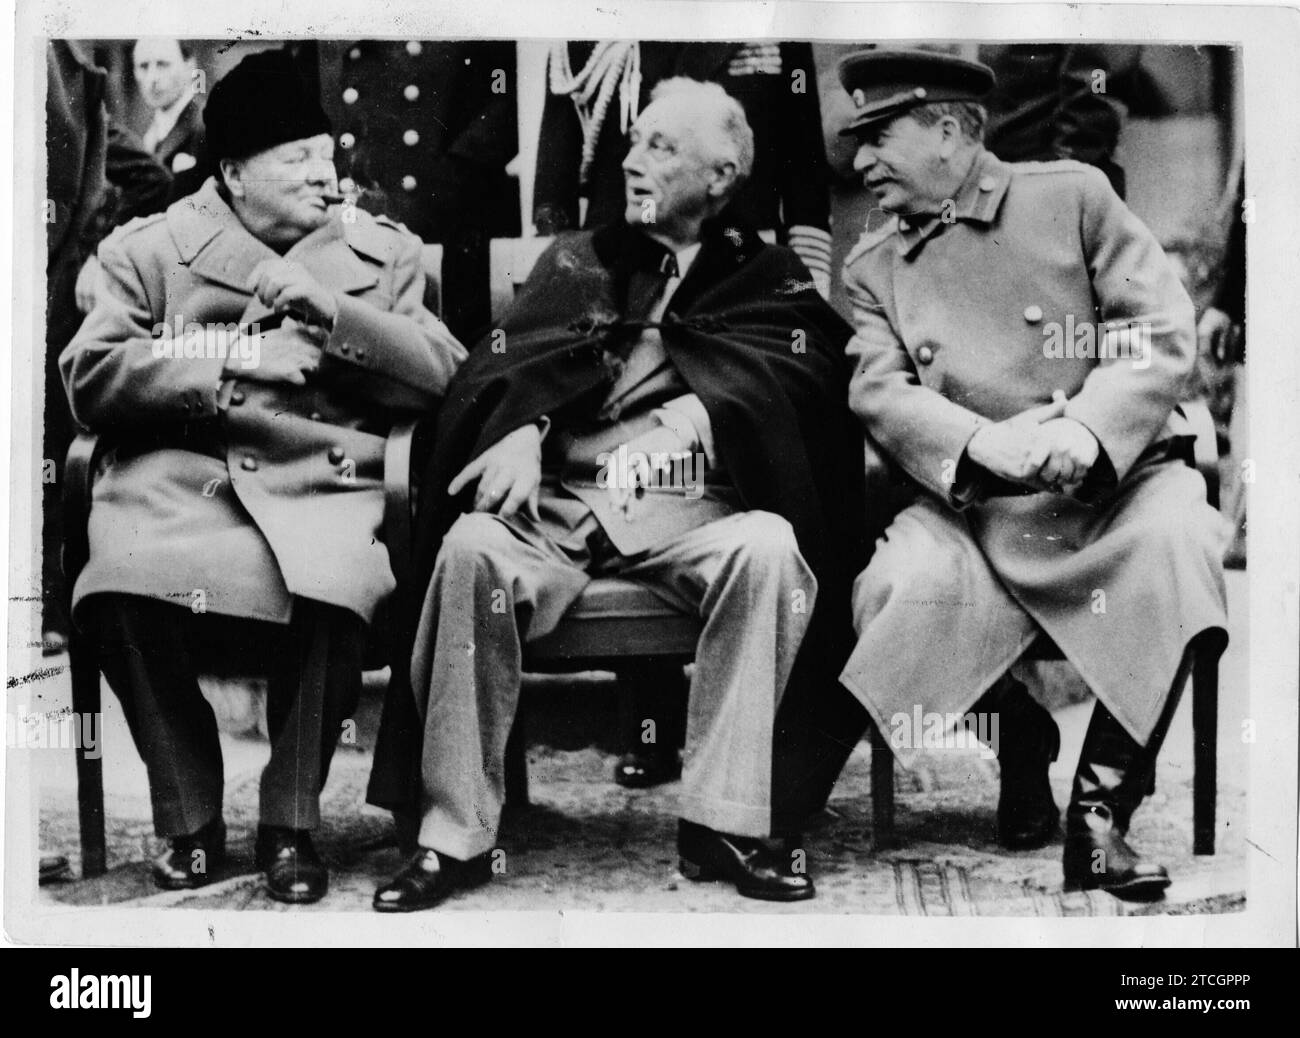 Yalta (Crimea). February 1945. Conference at the Livadia Palace, held between February 4 and 11, 1945, in which Churchill, Stalin and Roosevelt participated. Credit: Album / Archivo ABC / Keystone Stock Photo